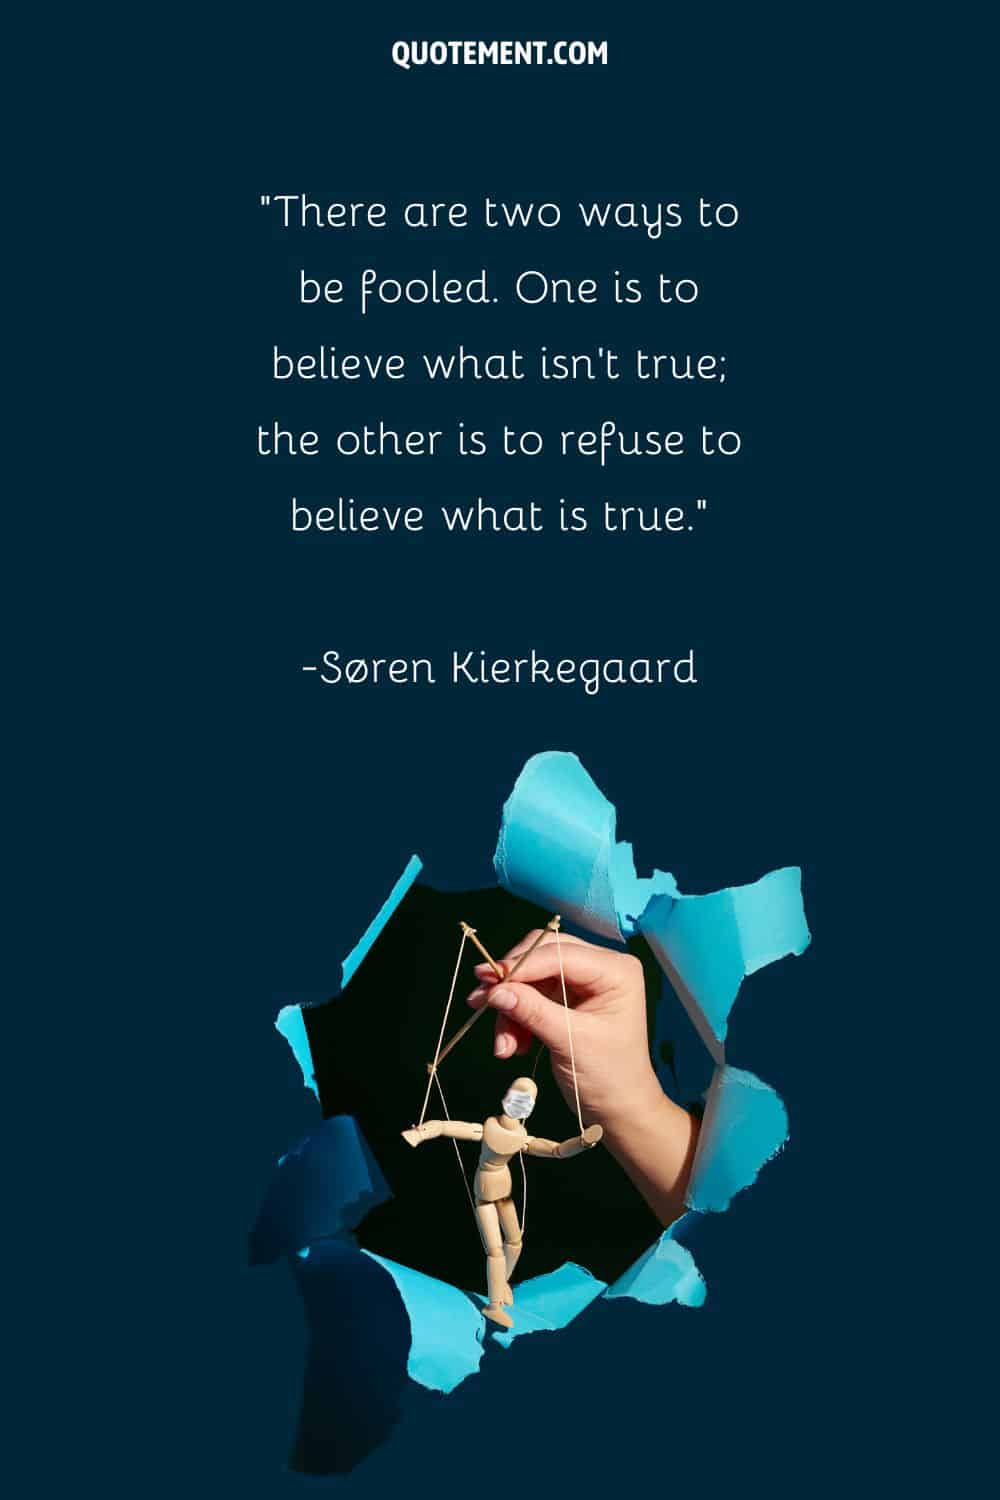 string puppet illustration representing quote on manipulation